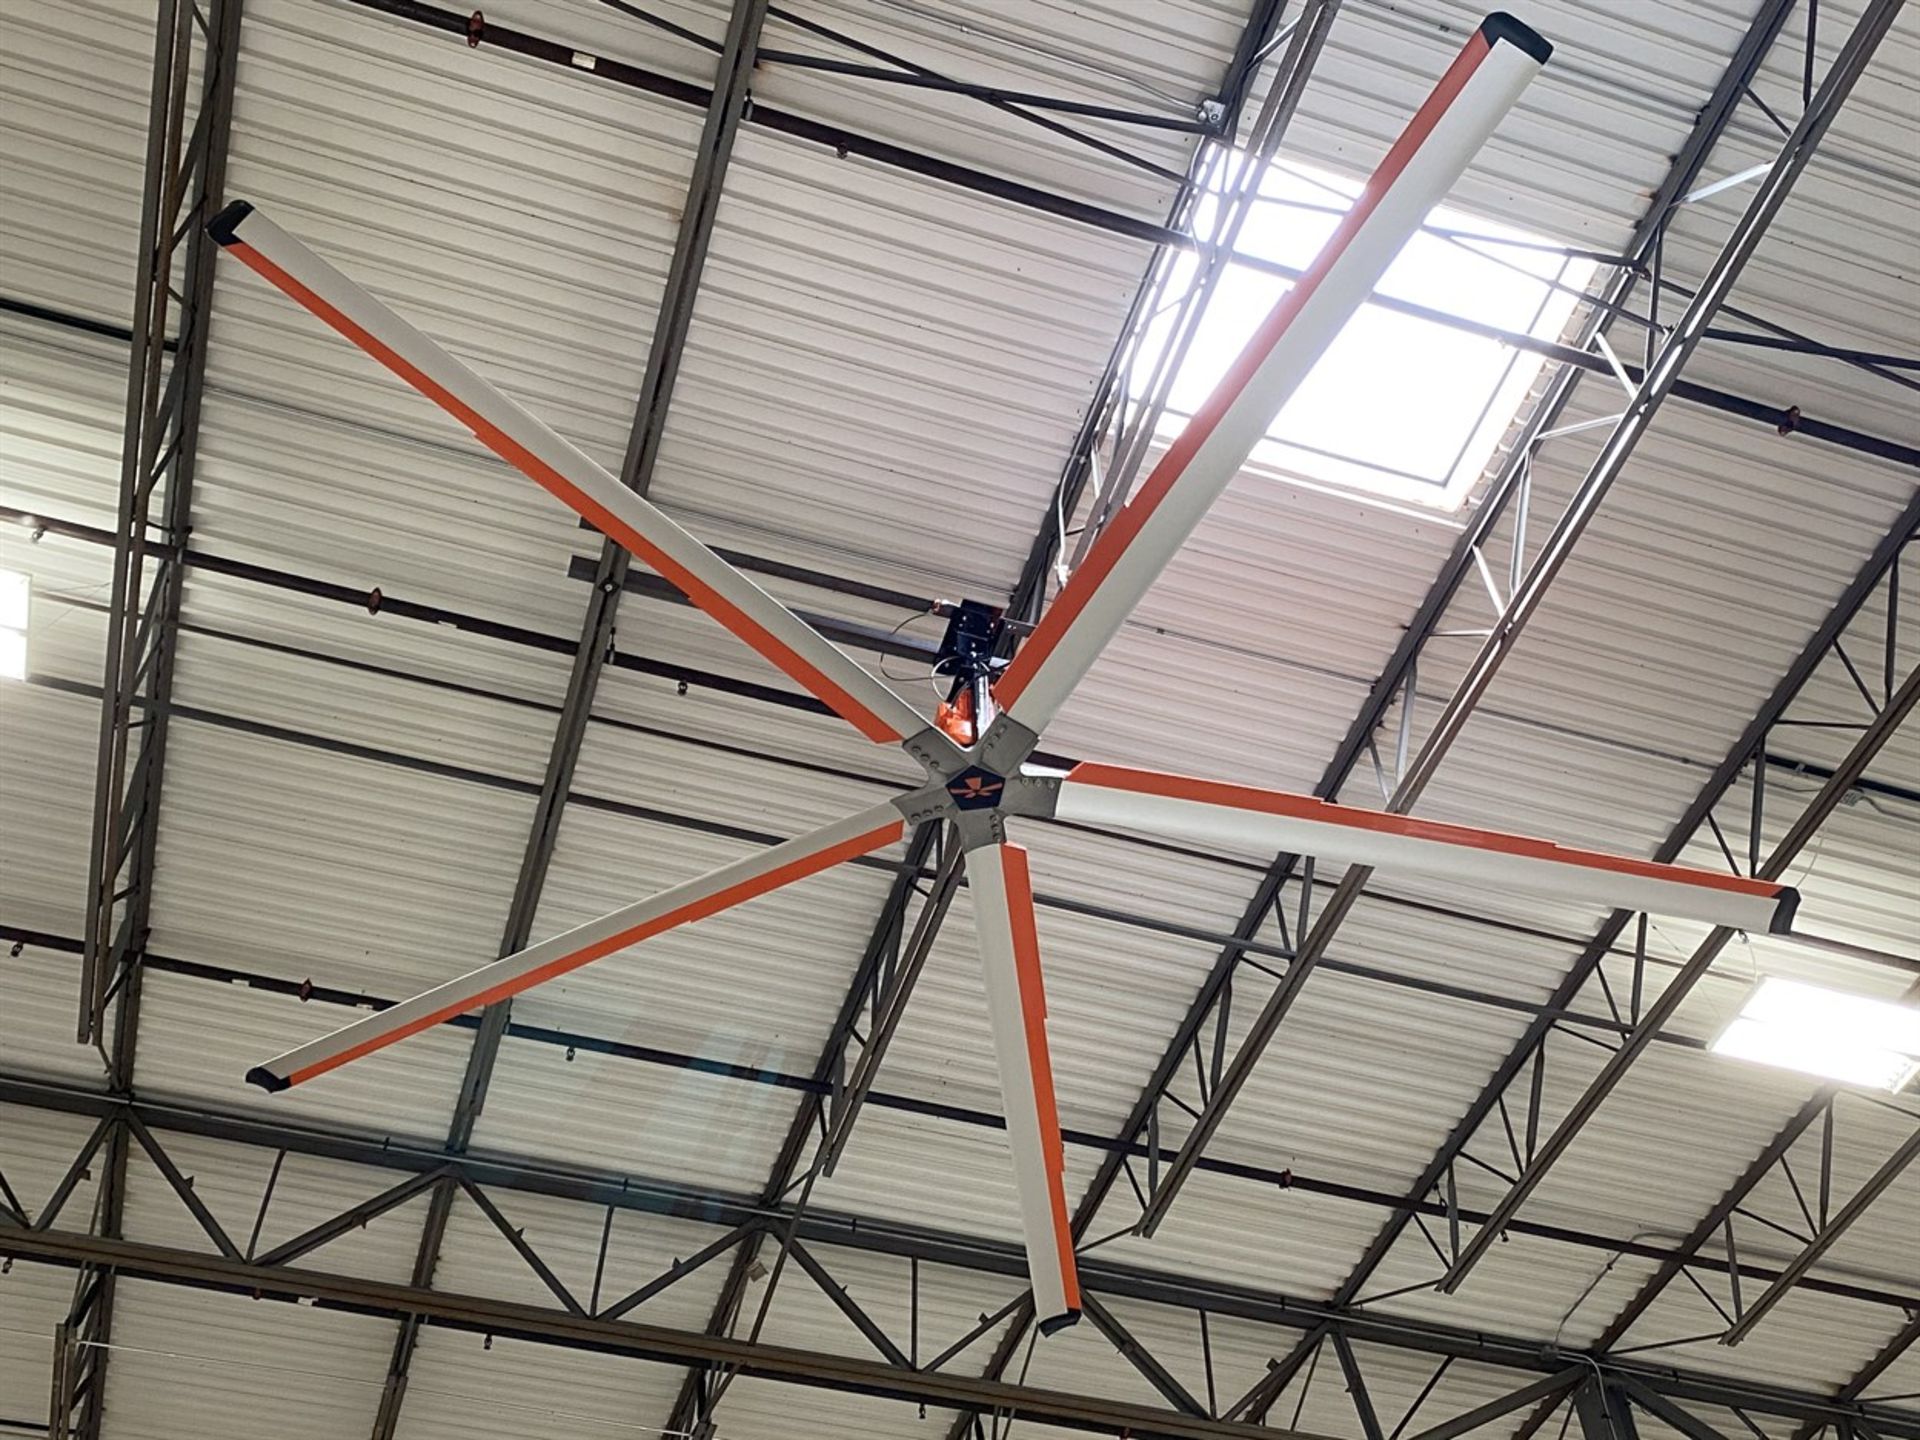 GO FAN YOURSELF Z-Tech 24’ Fans, 180’ Max Cooling Area, 2 HP, ABB Control - Image 2 of 3